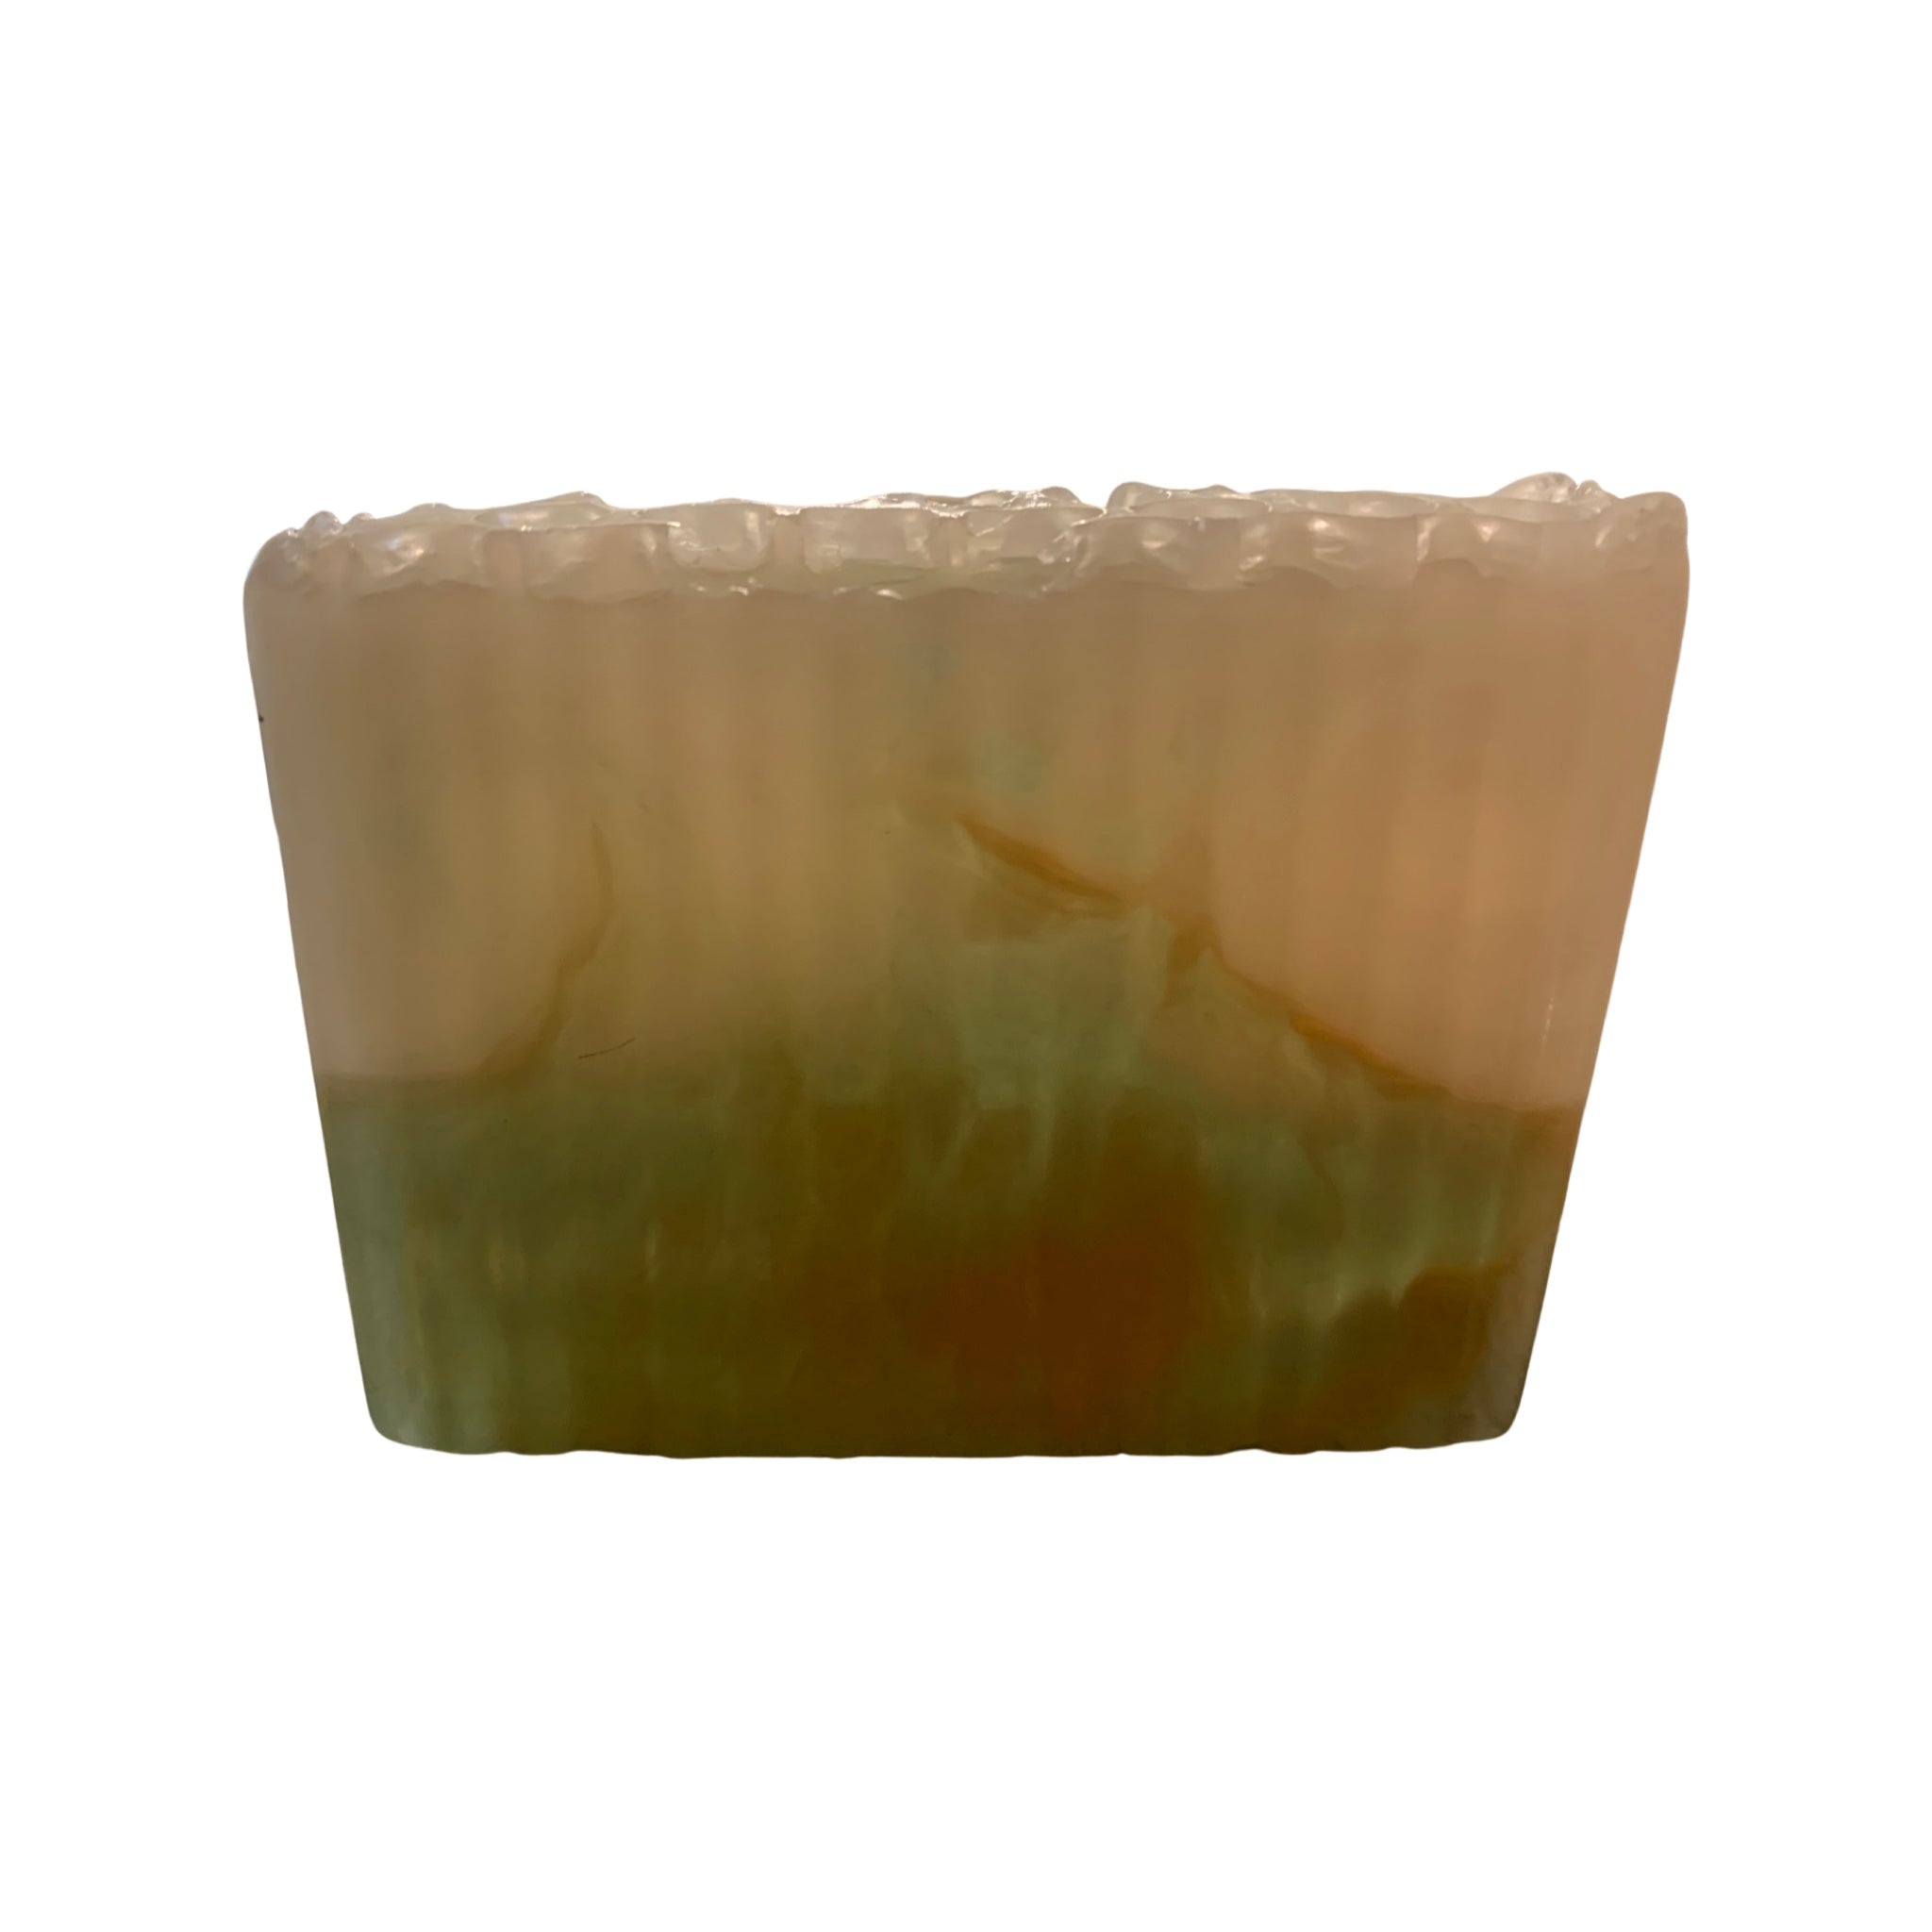 Honey gs handcrafted soap 1.